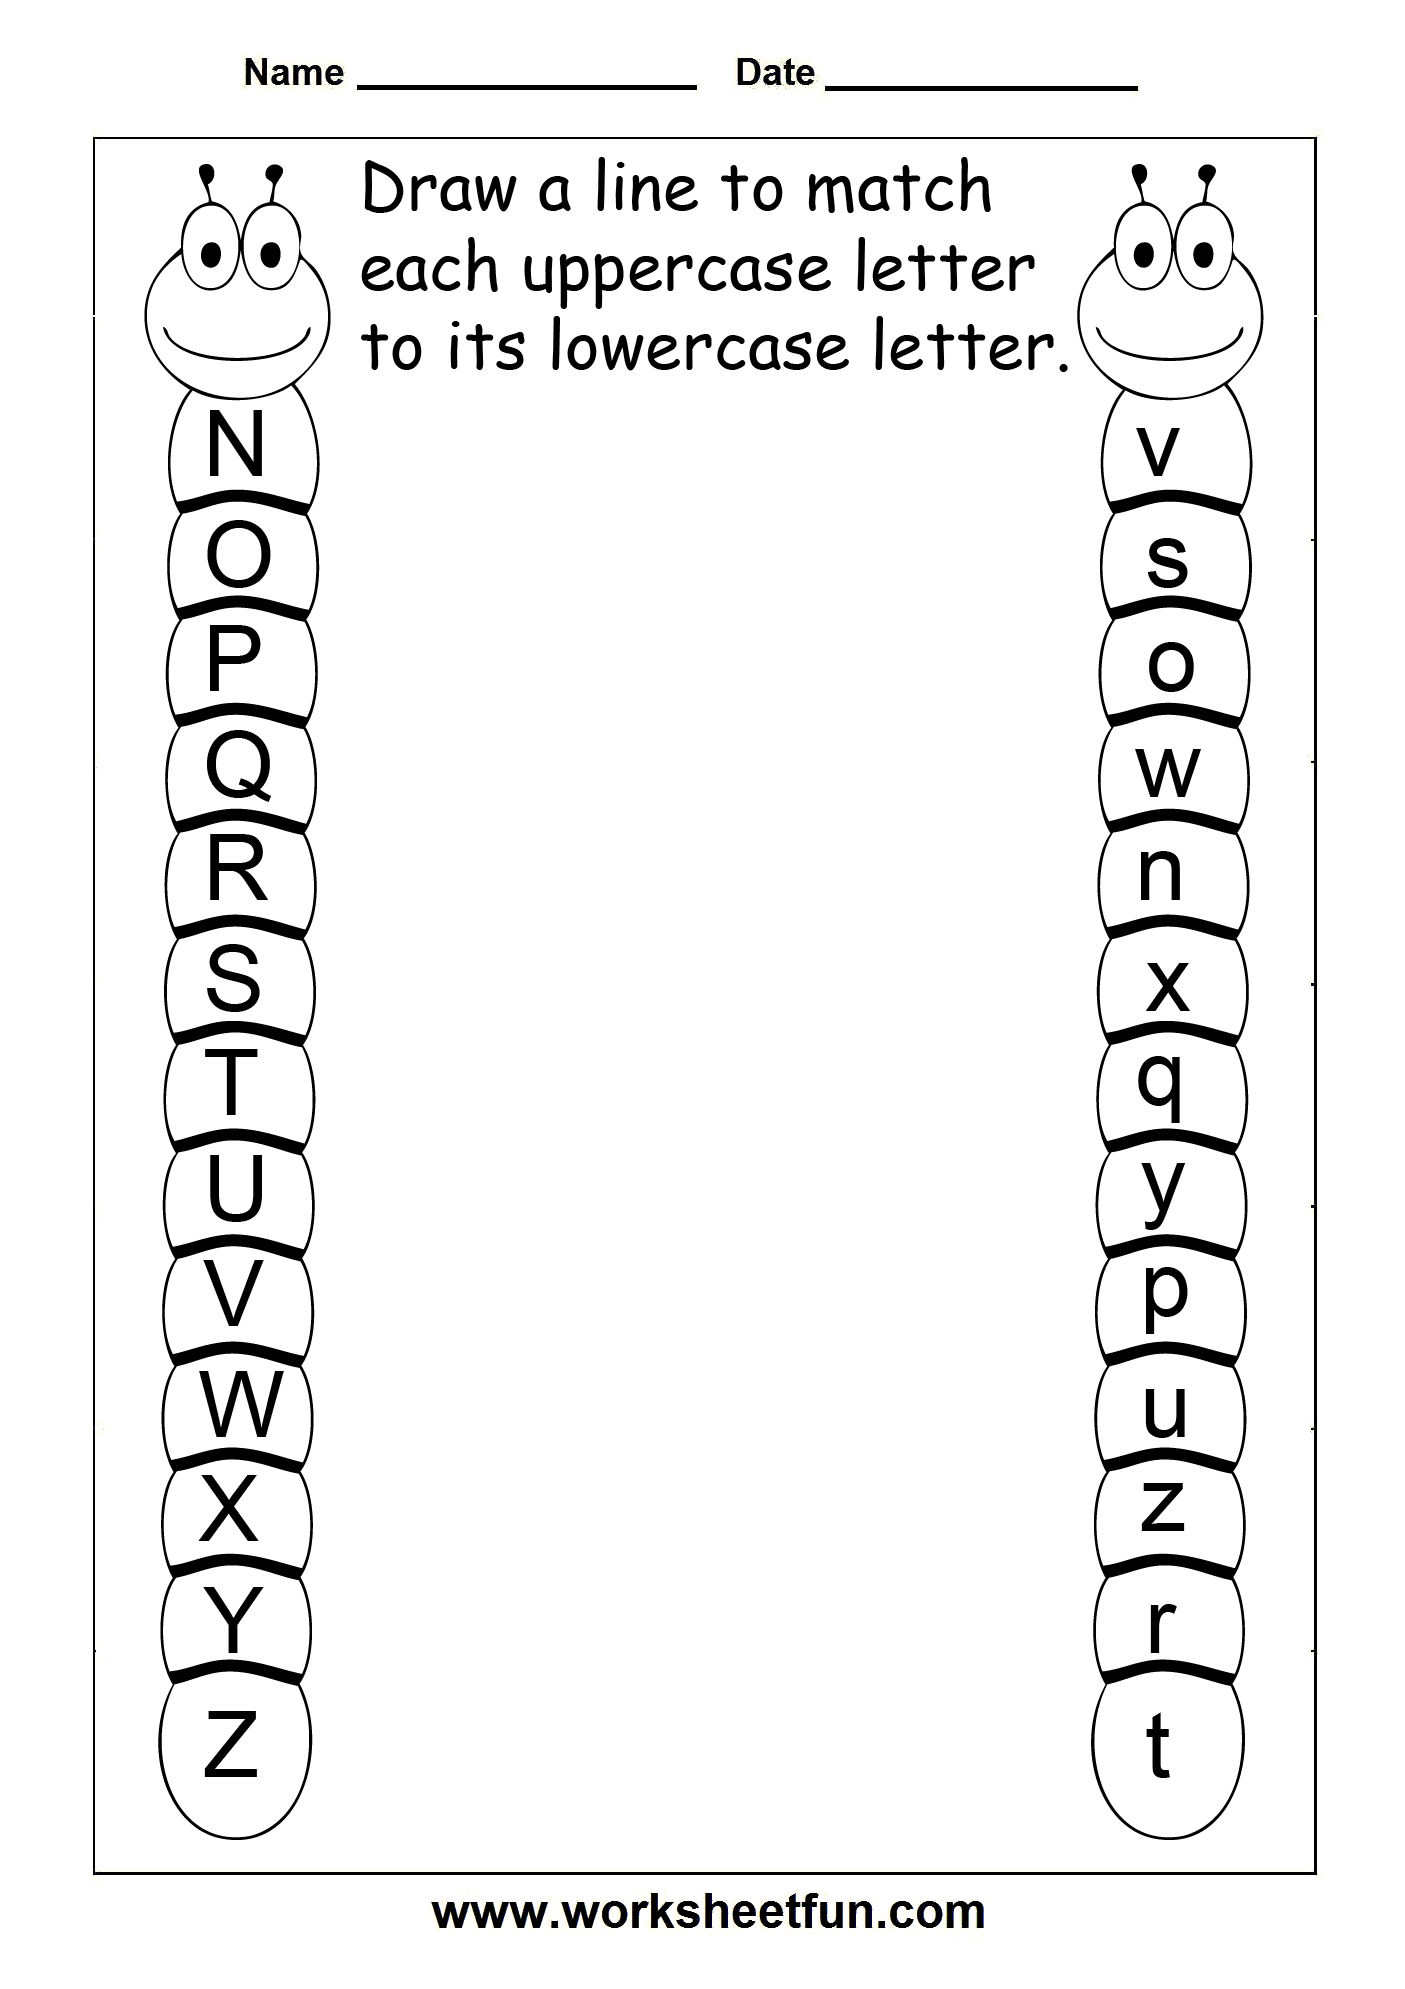 Match Uppercase And Lowercase Letters – 11 Worksheets / FREE Printable ...